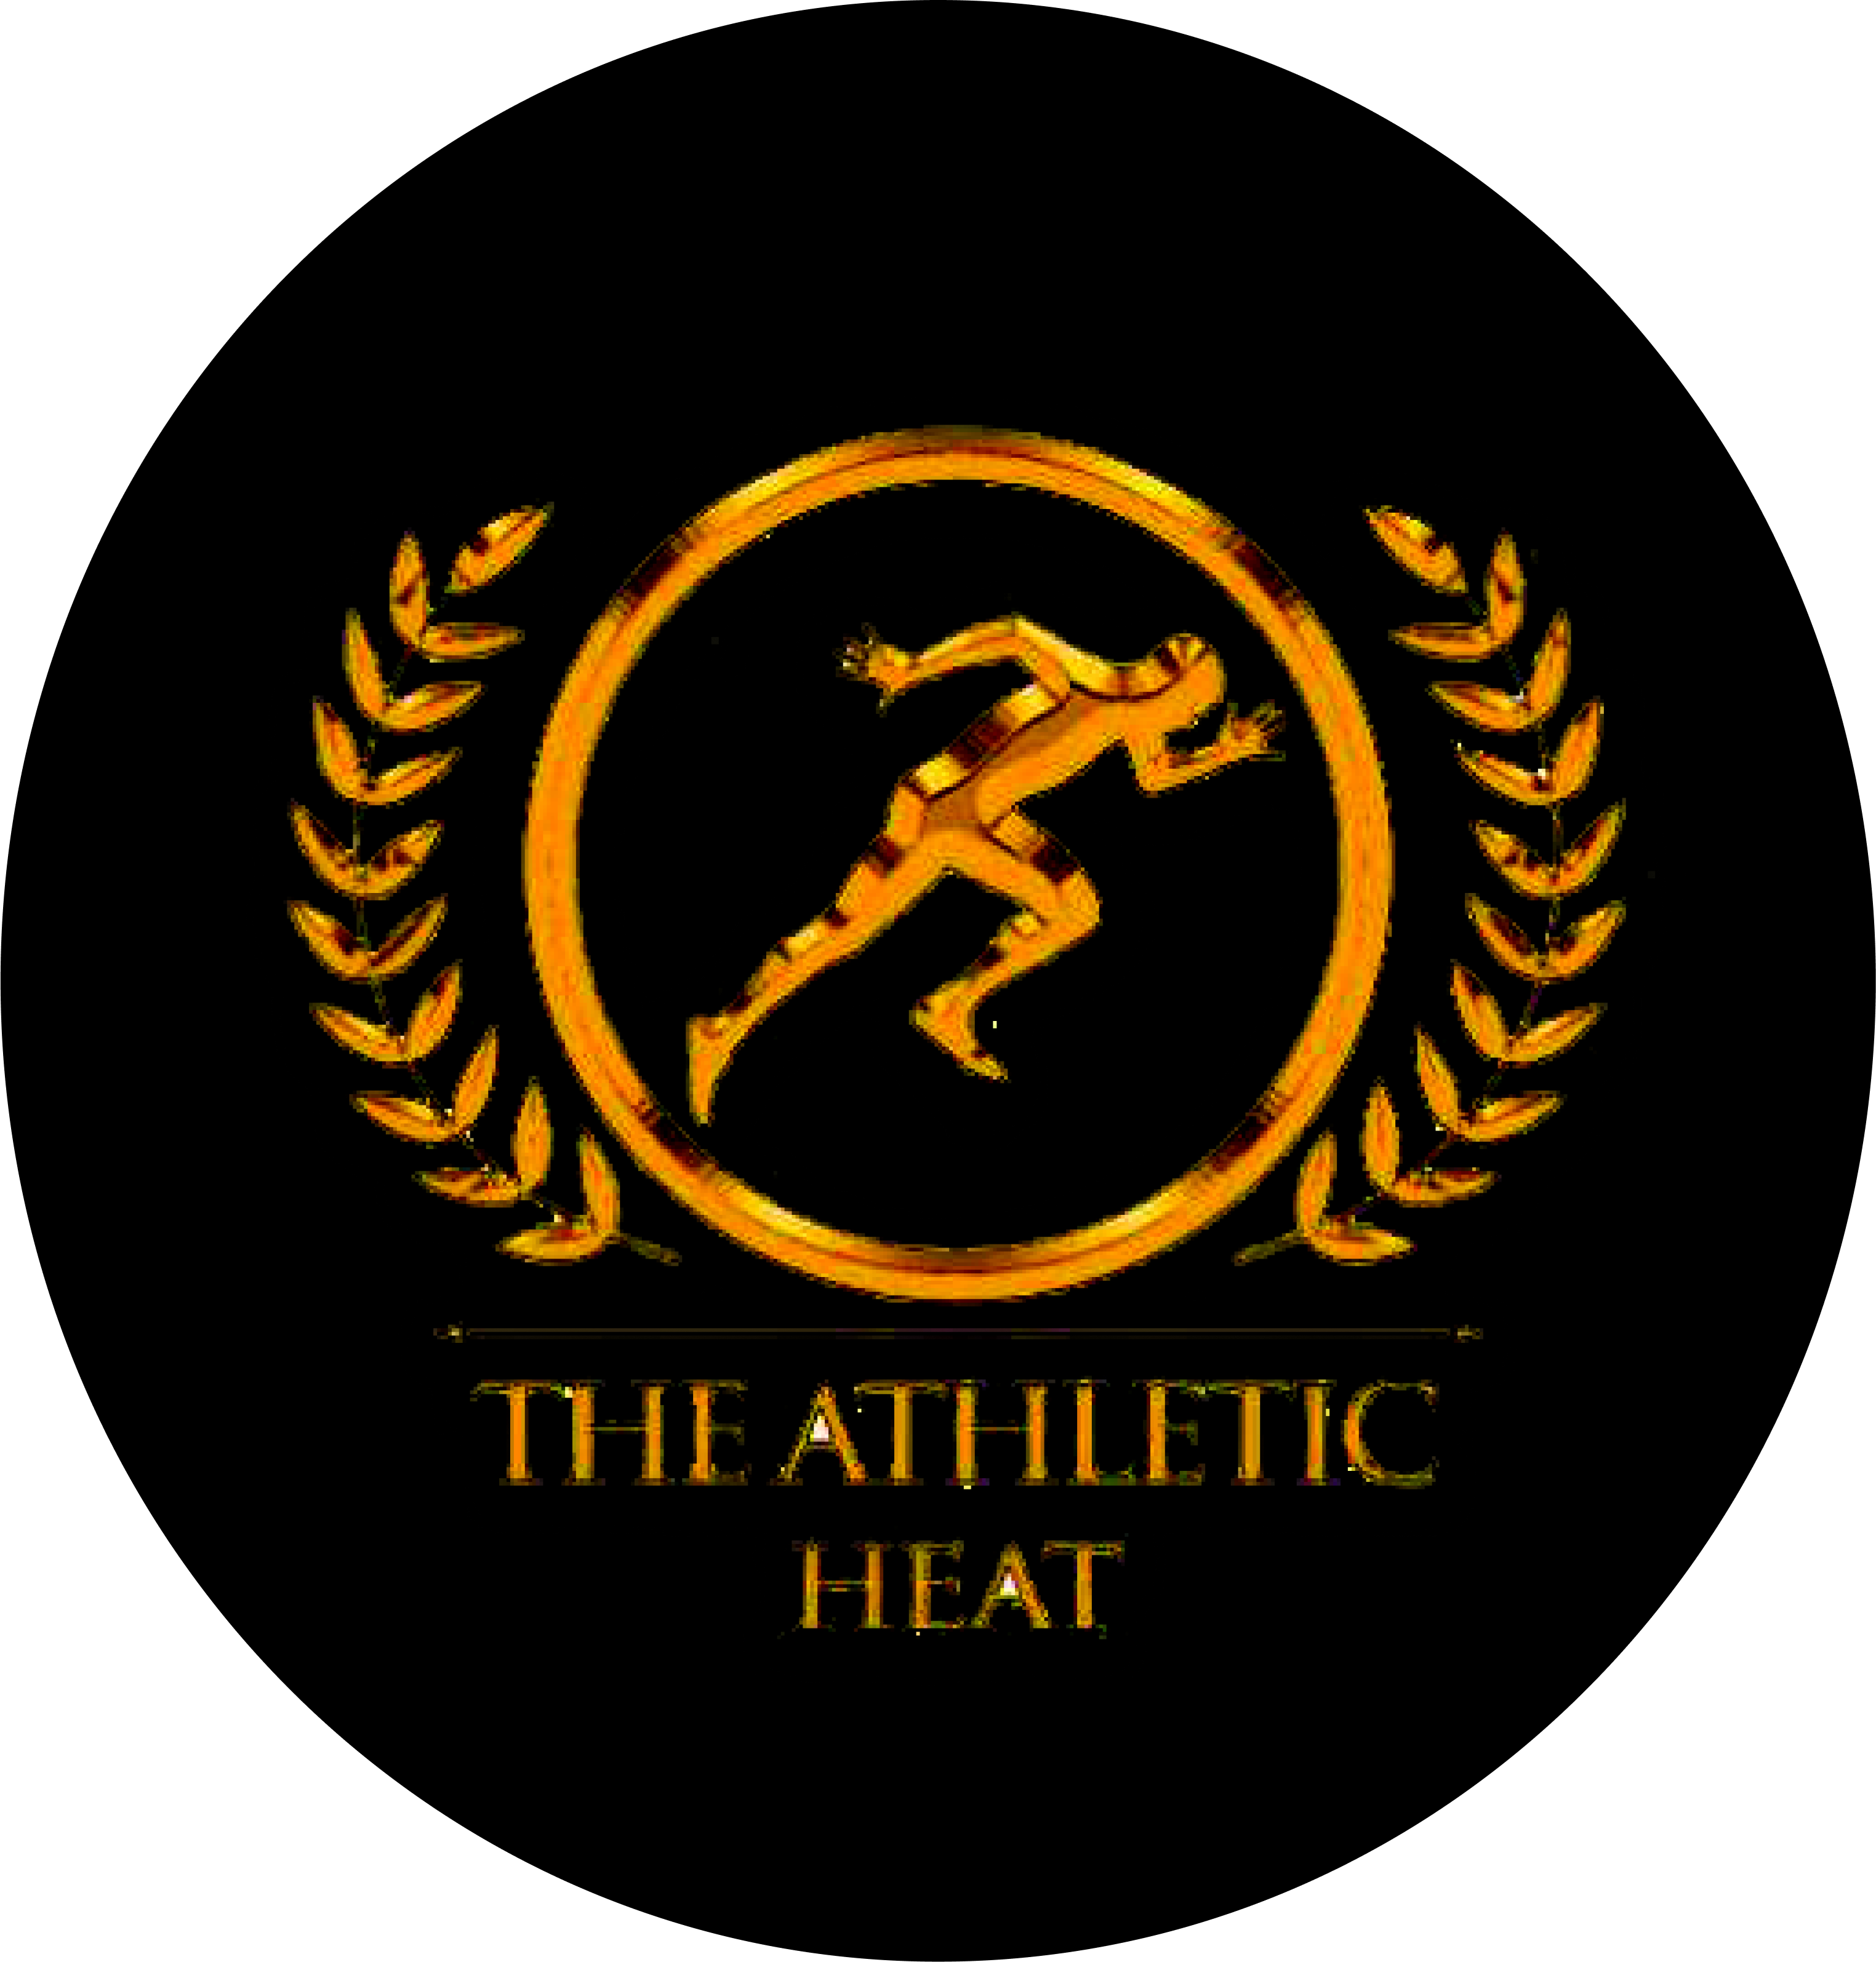 THE ATHLETIC HEAT